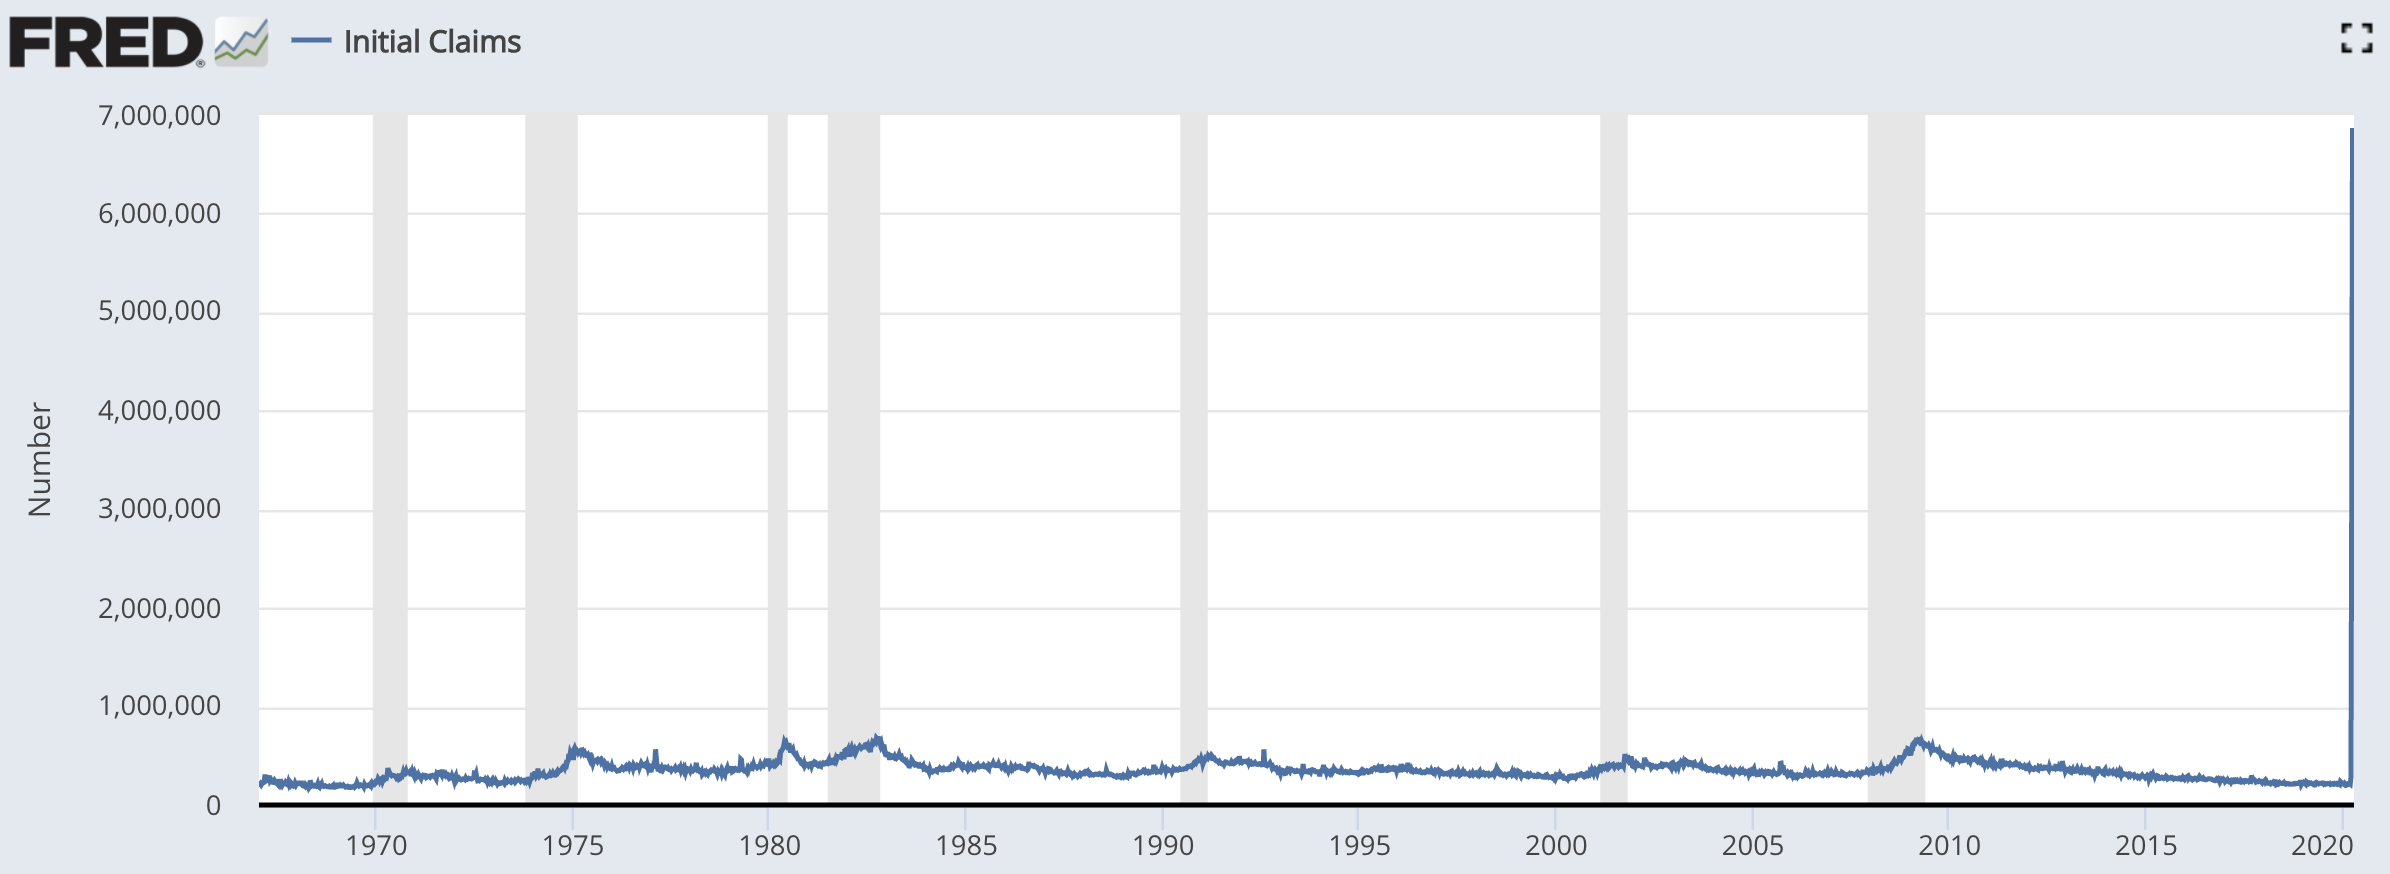 initial claims unemployment insurance